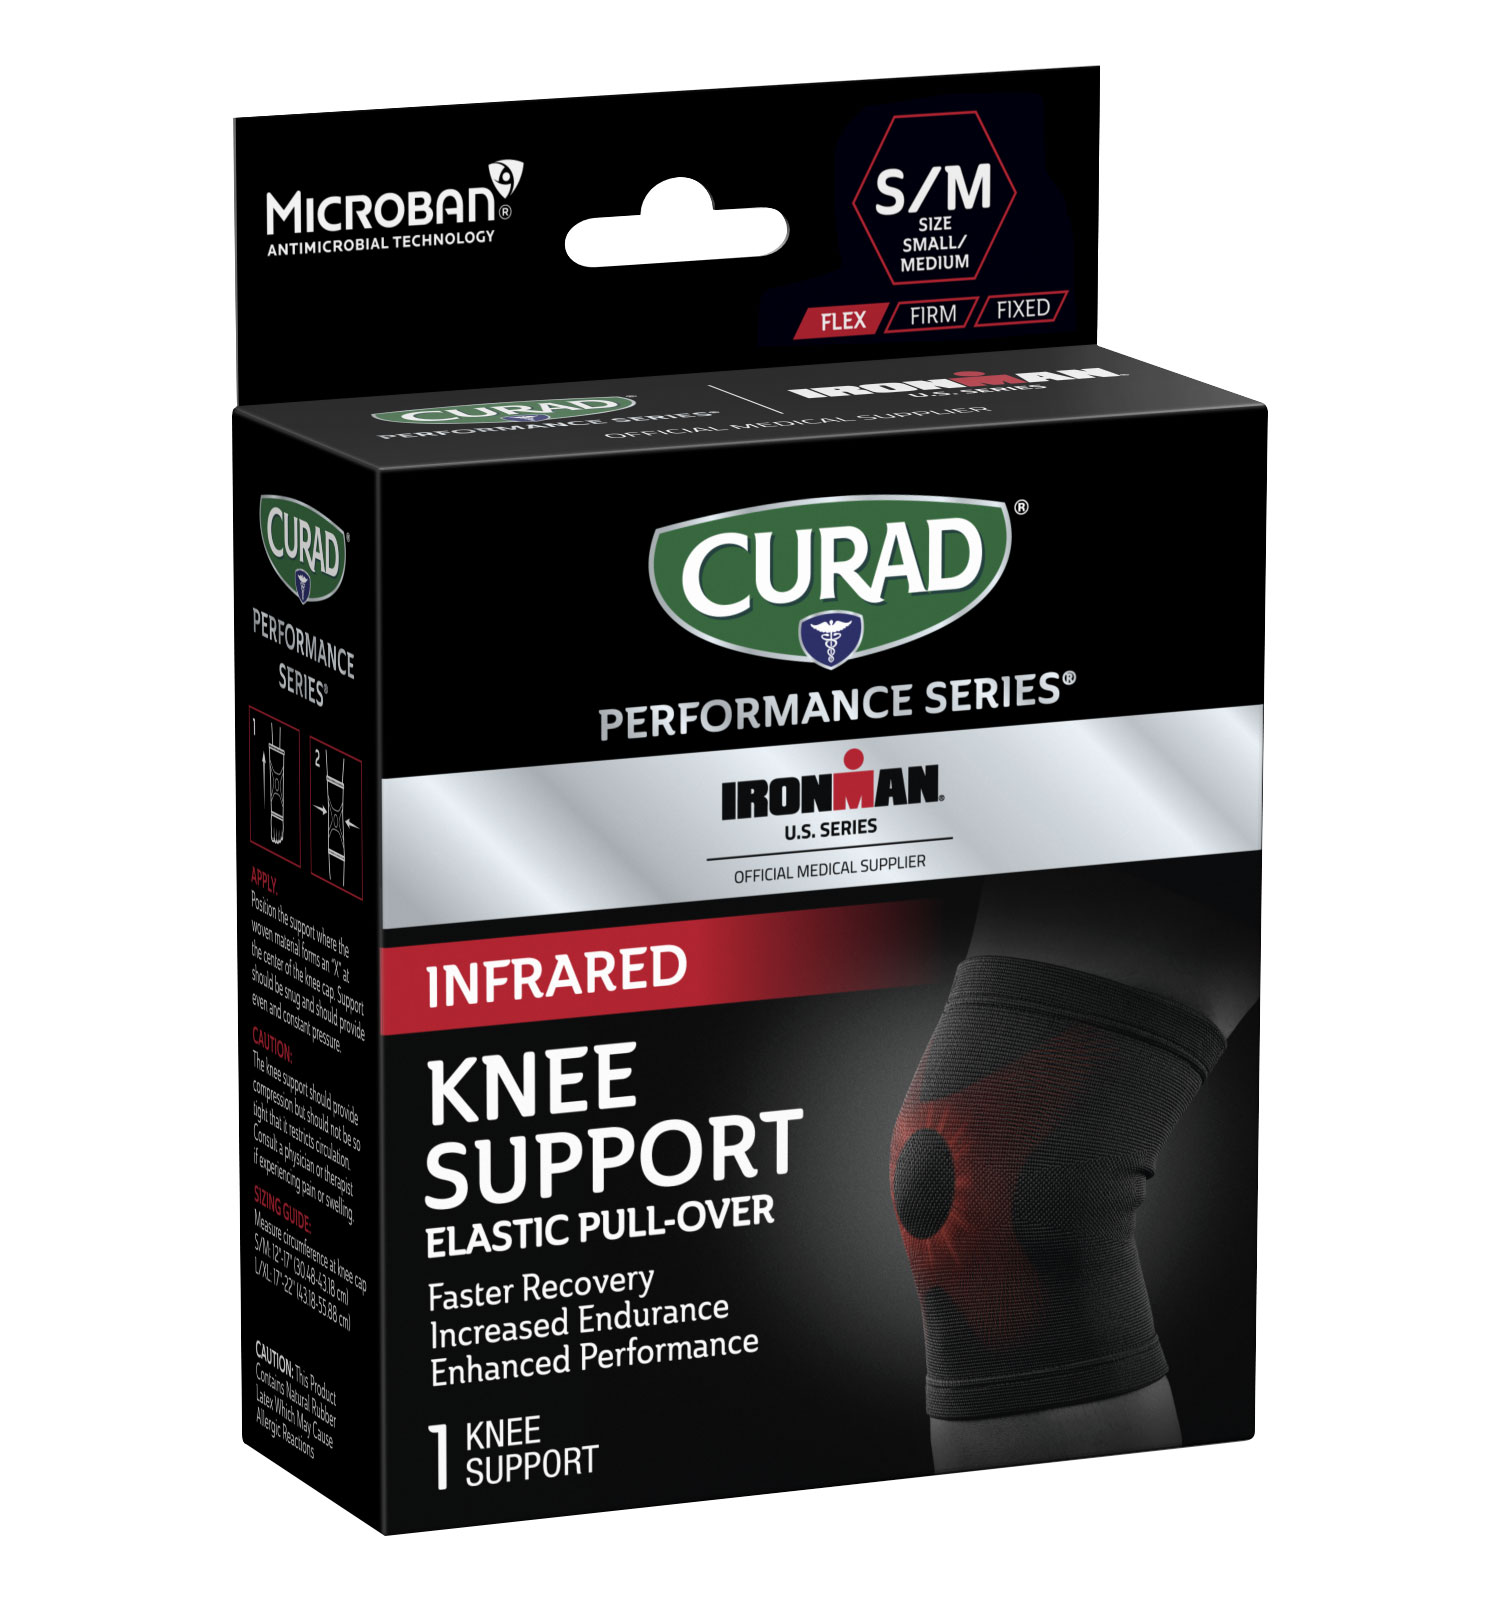 CURAD Performance Series IRONMAN Infrared Knee Support, Elastic